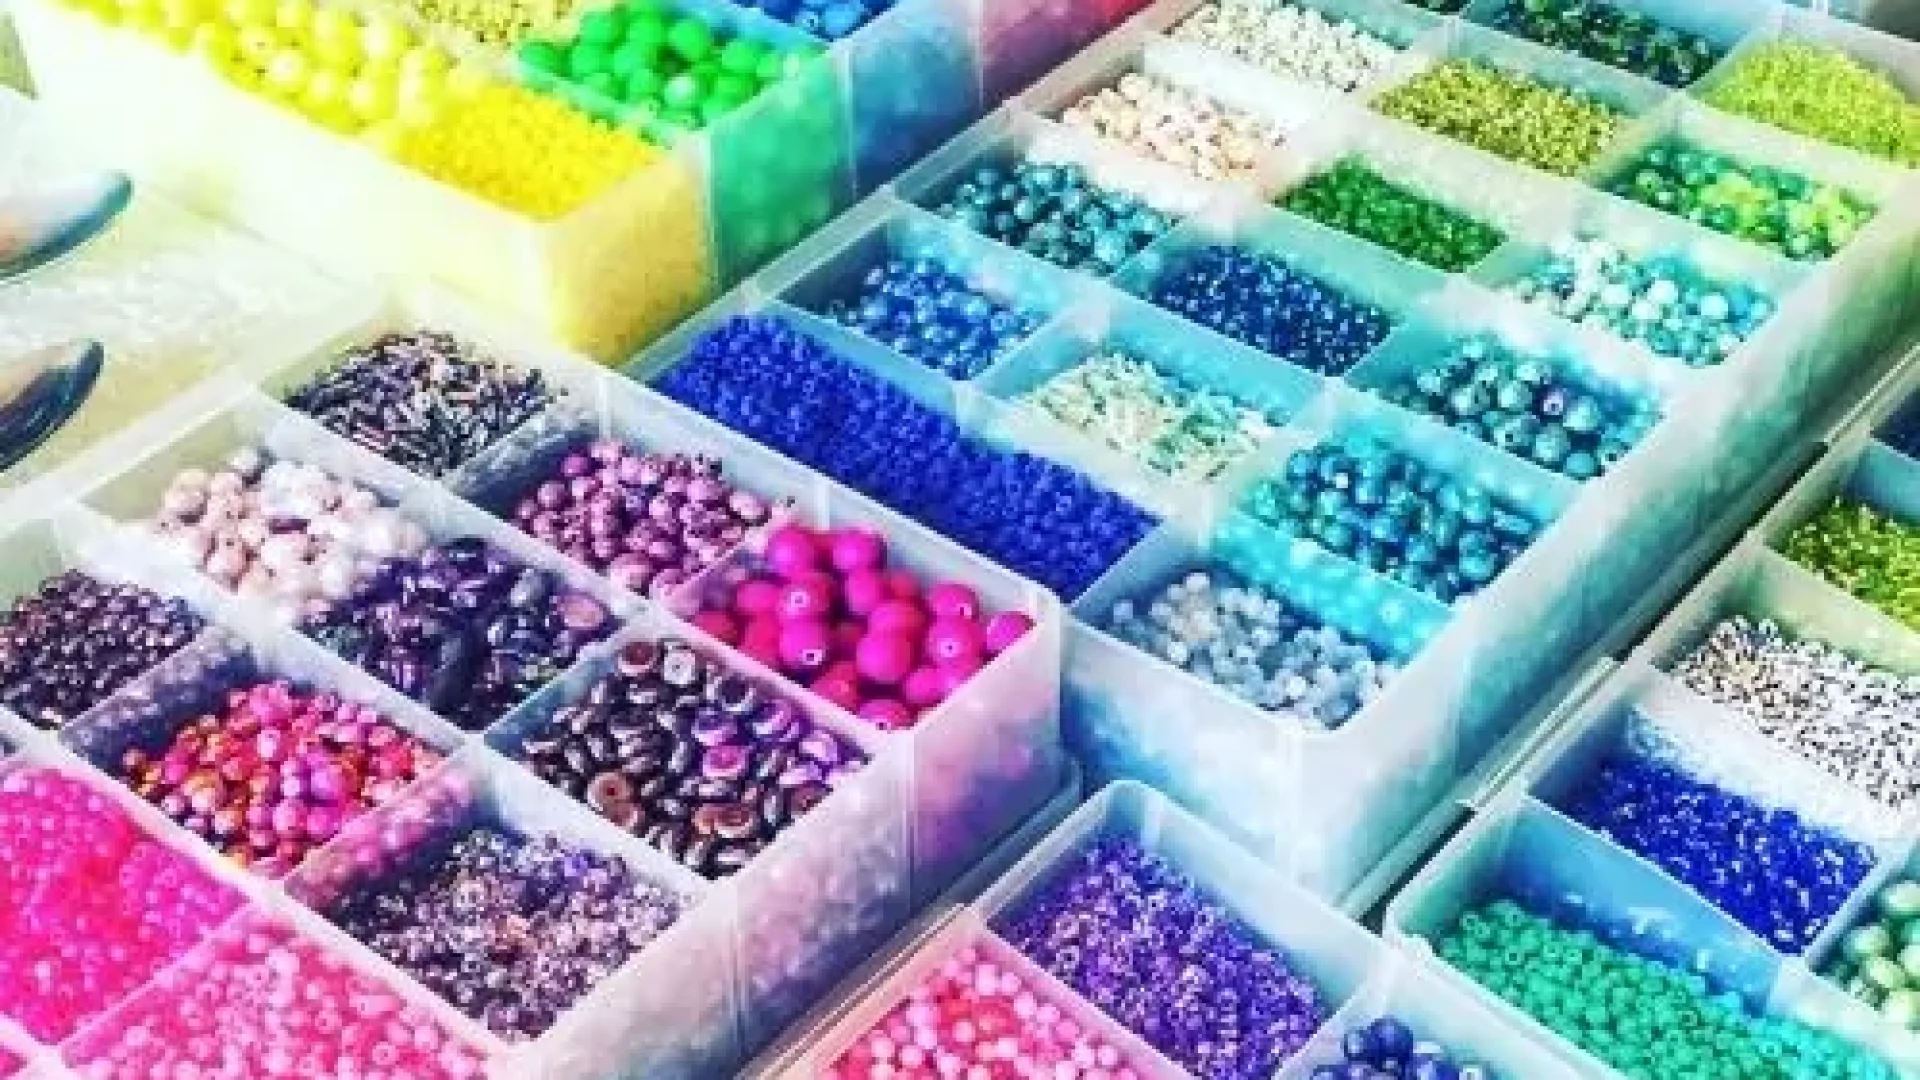 A Kids Jewelry Making Party - Bay Area full of colorful beads on a table.